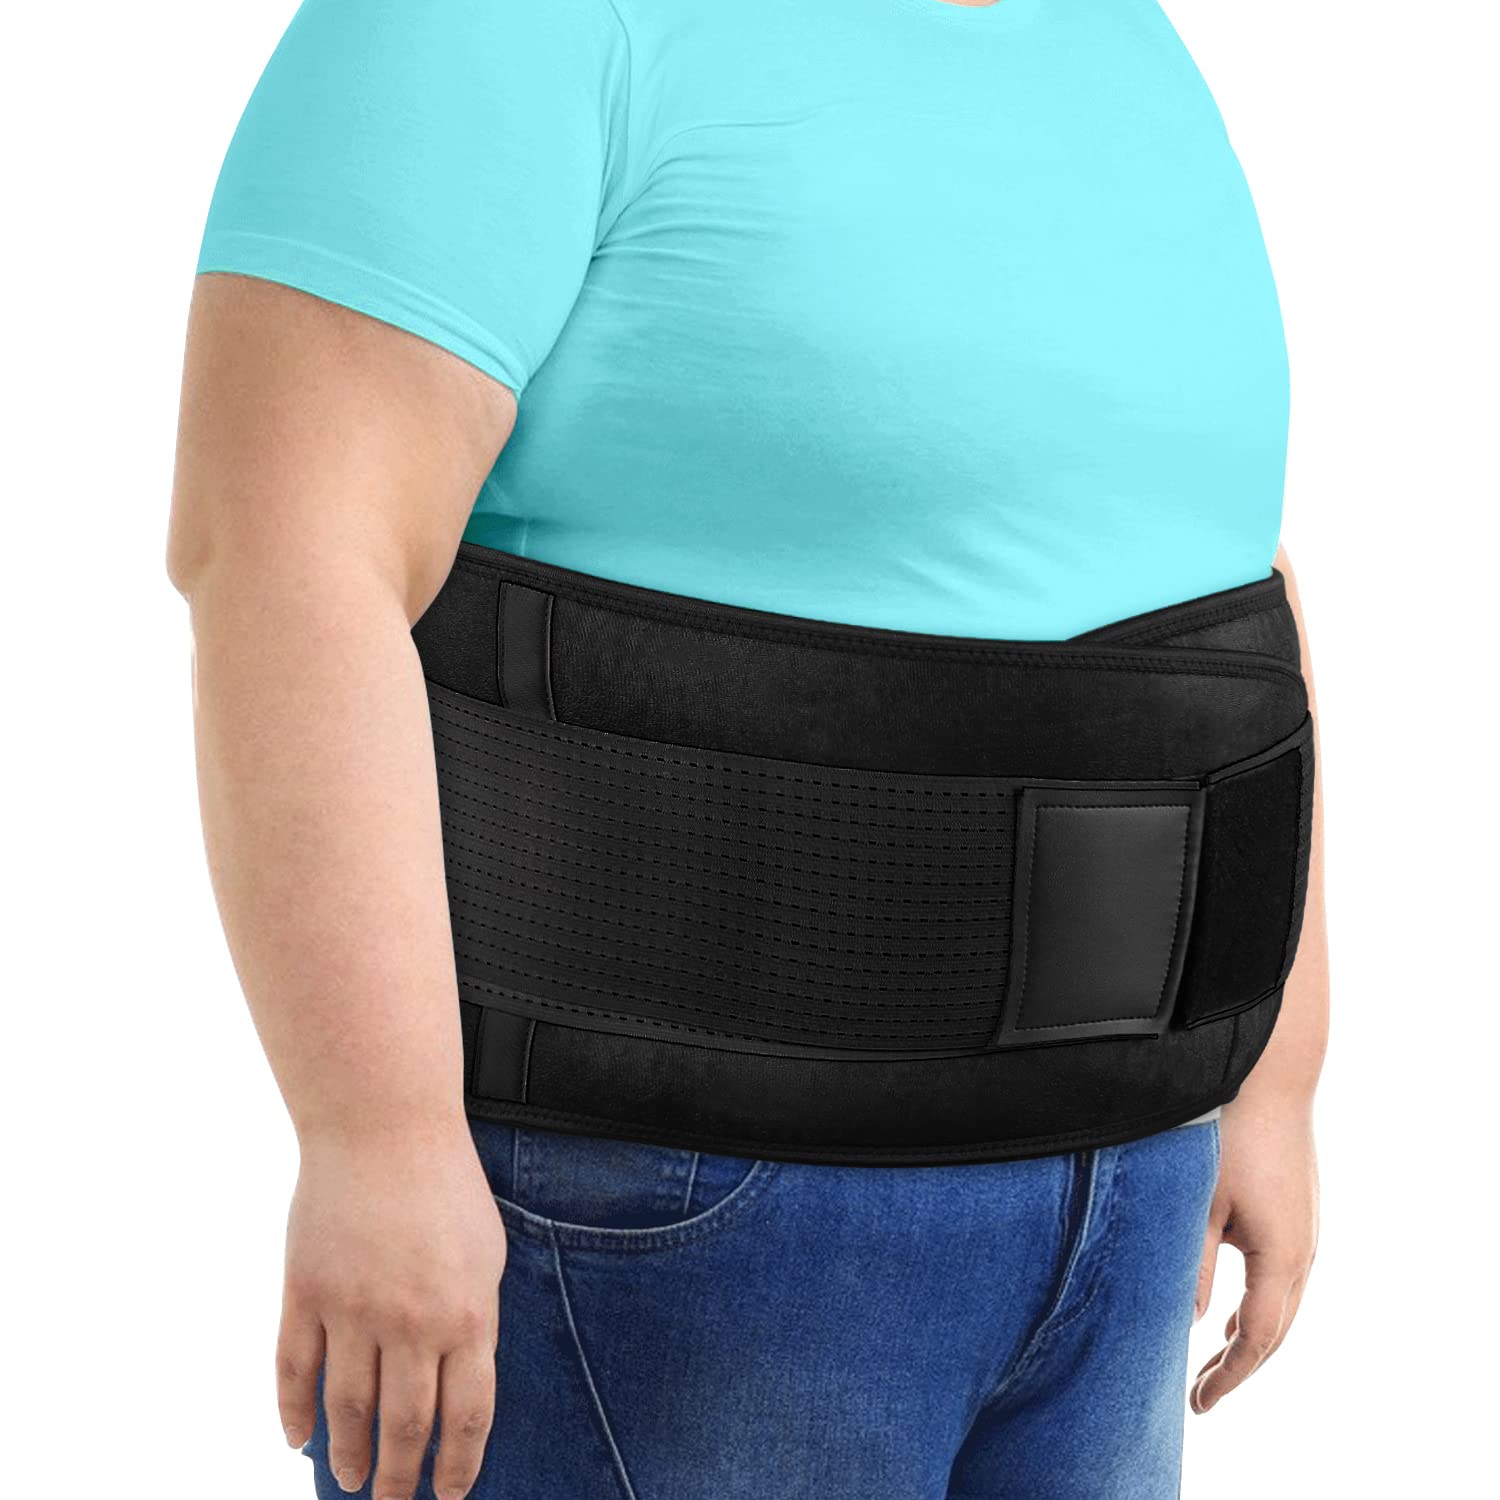  T TIMTAKBO Lower Back Brace W/Removable Lumbar Pad for Men  Women Herniated Disc,Sciatica,Scoliosis,Waist Pain, Lumbar Support Belt(Black-L/XL  Fit Belly 29.5-37.5) : Health & Household